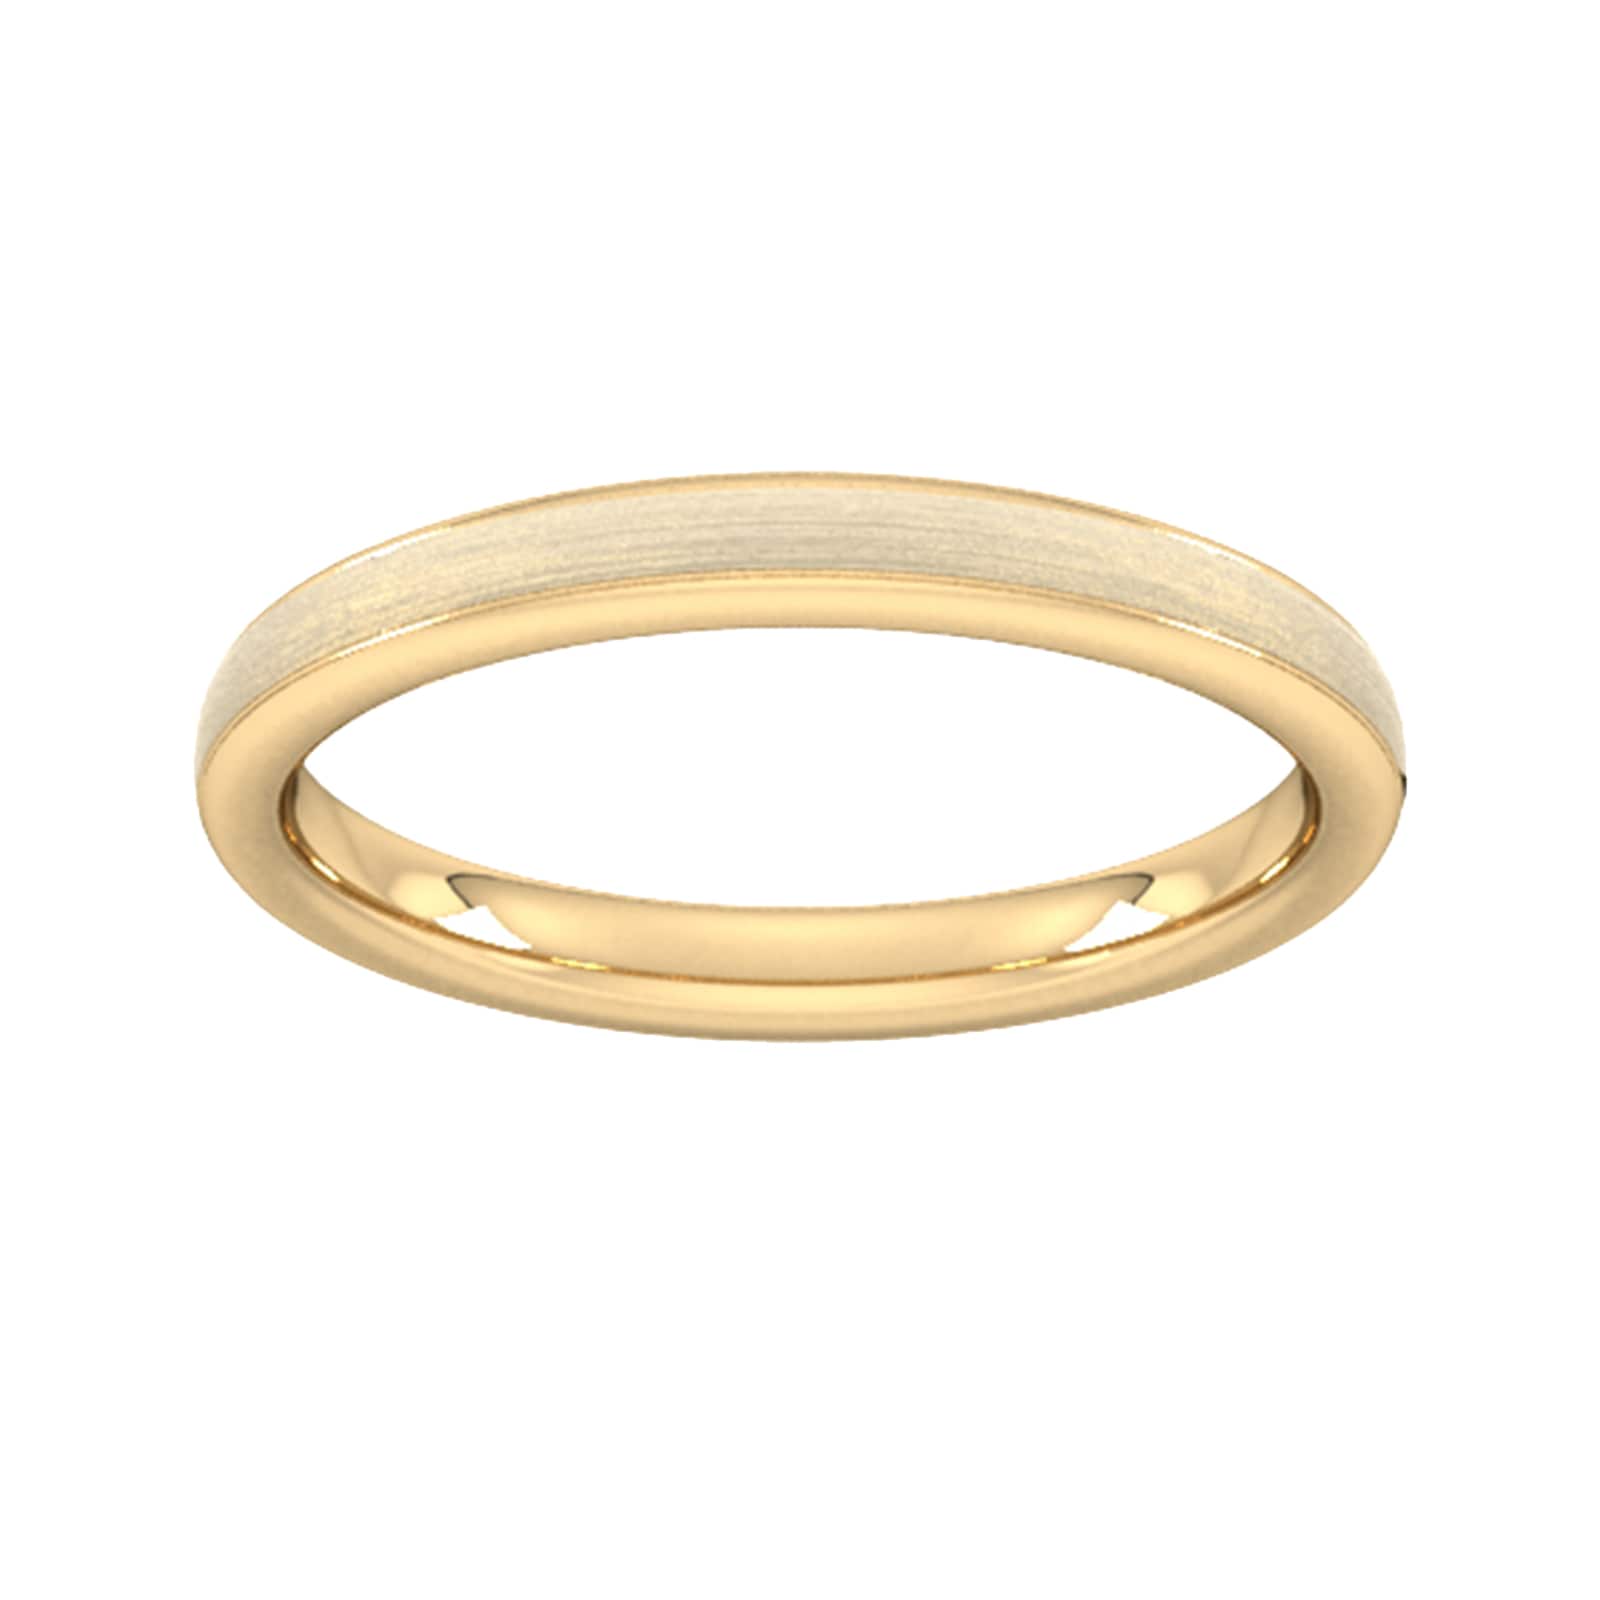 2.5mm Flat Court Heavy Matt Centre With Grooves Wedding Ring In 9 Carat Yellow Gold - Ring Size W